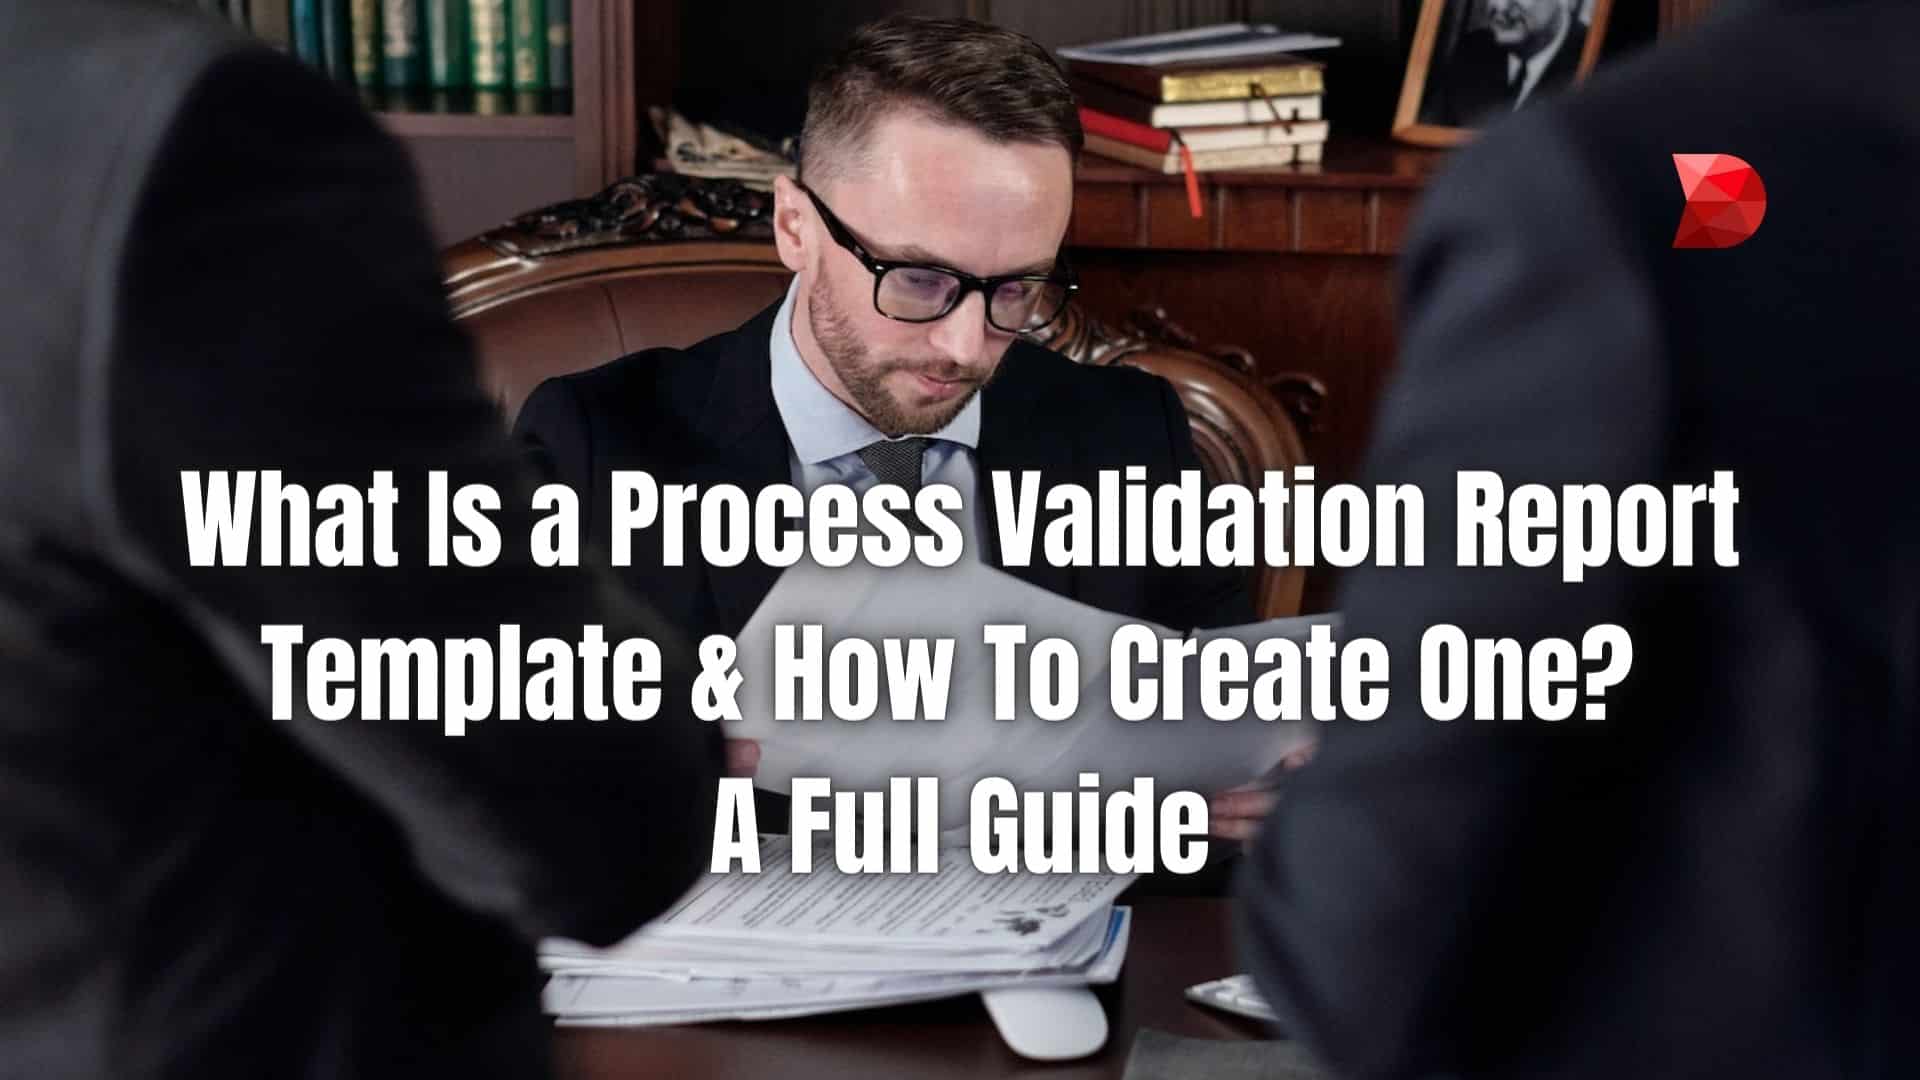 What Is a Process Validation Report Template & How To Create One A Full Guide